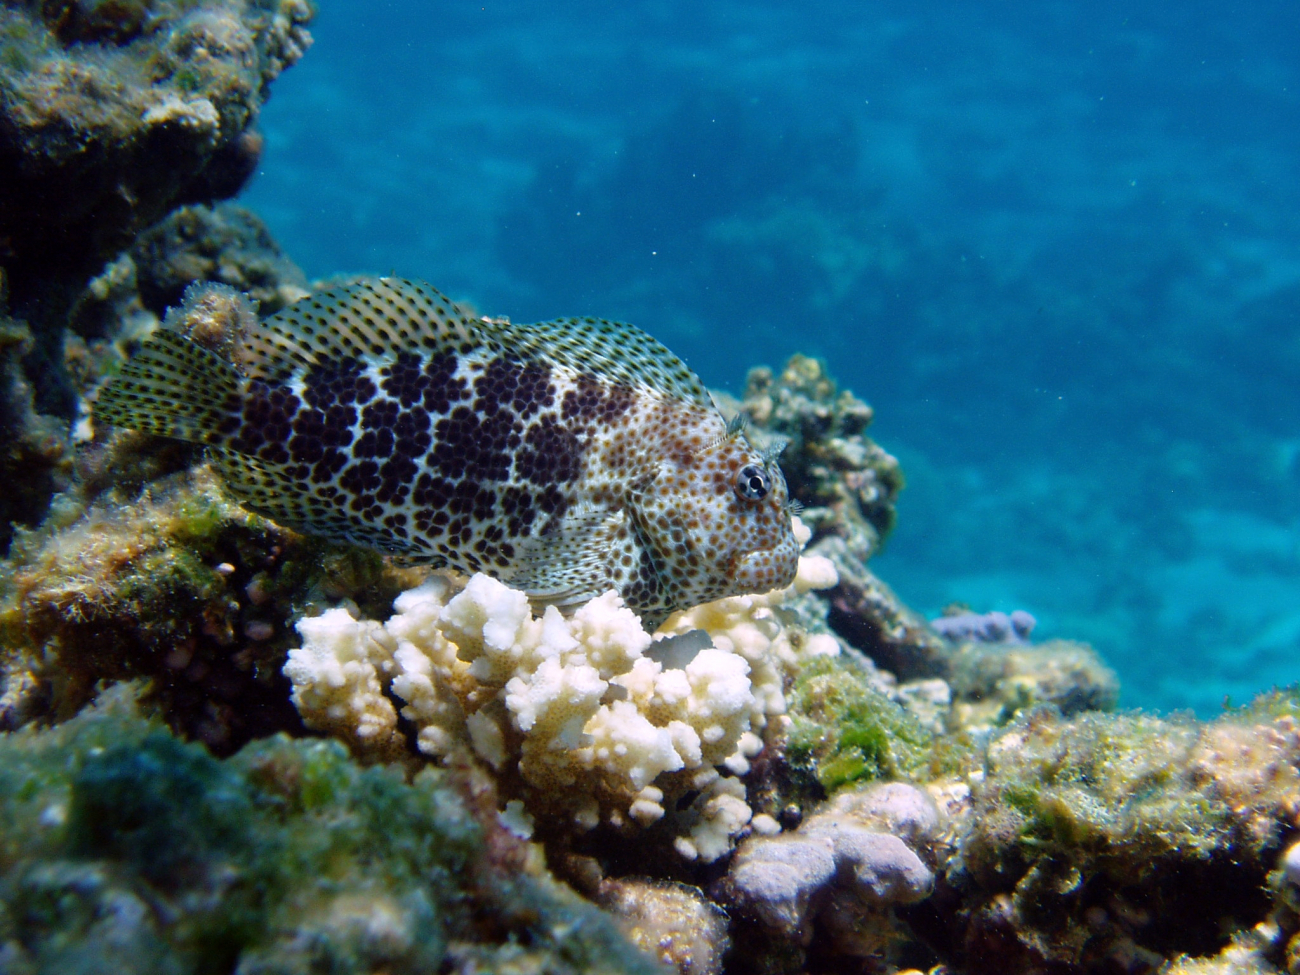 Short-bodied blenny (Exallias brevis) is an obligate corallivore, which feeds on coral